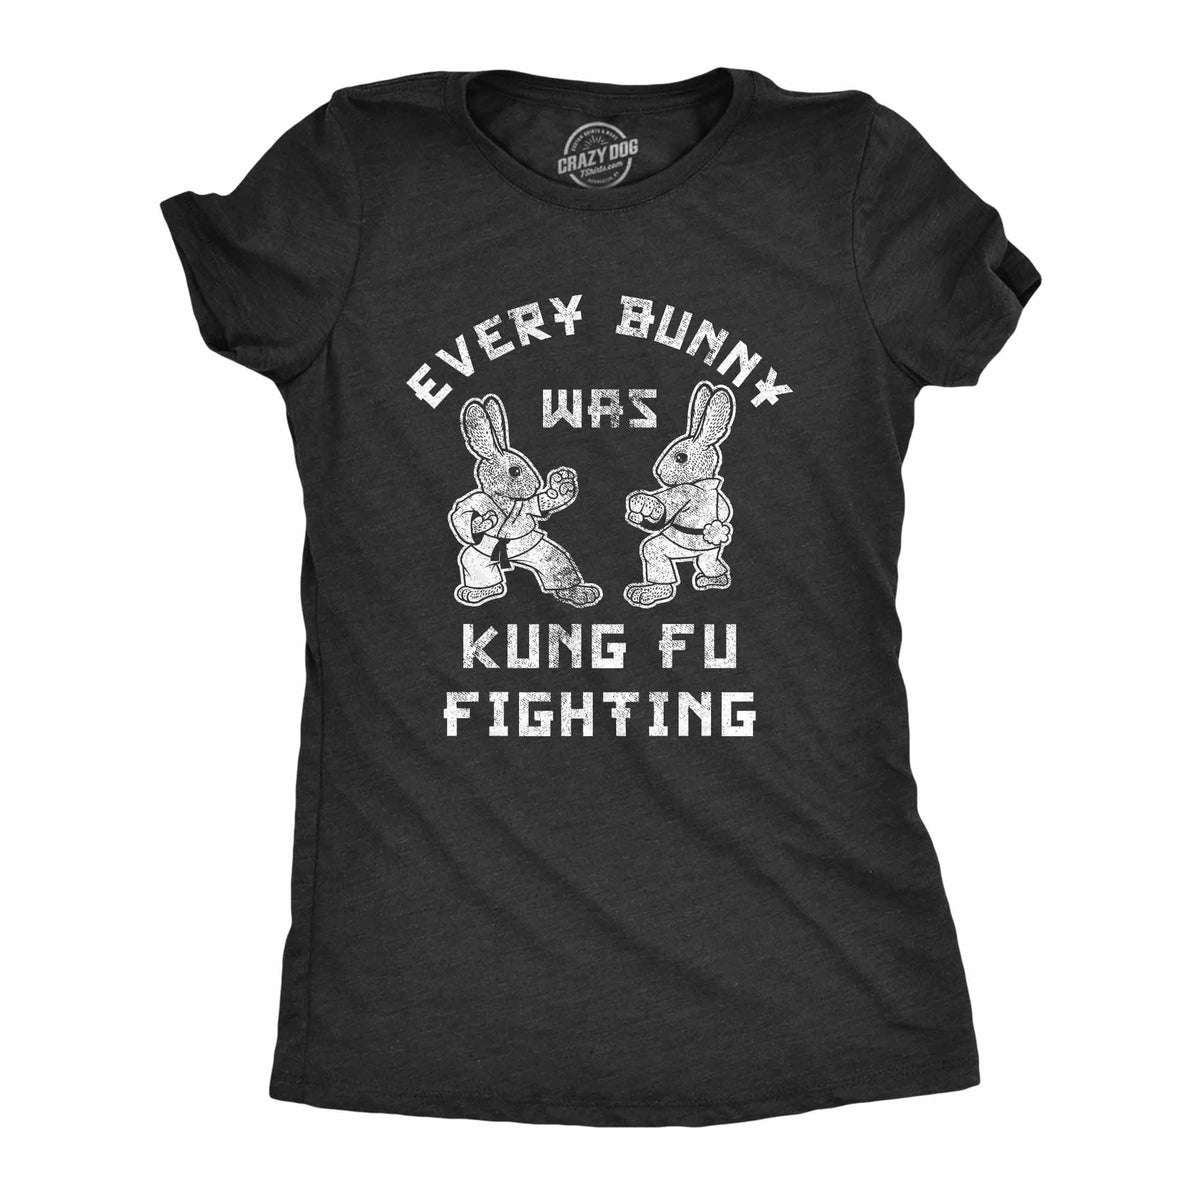 Funny Heather Black - Bunny Kung Fu Every Bunny Was Kung Fu Fighting Womens T Shirt Nerdy Easter Animal Sarcastic Tee